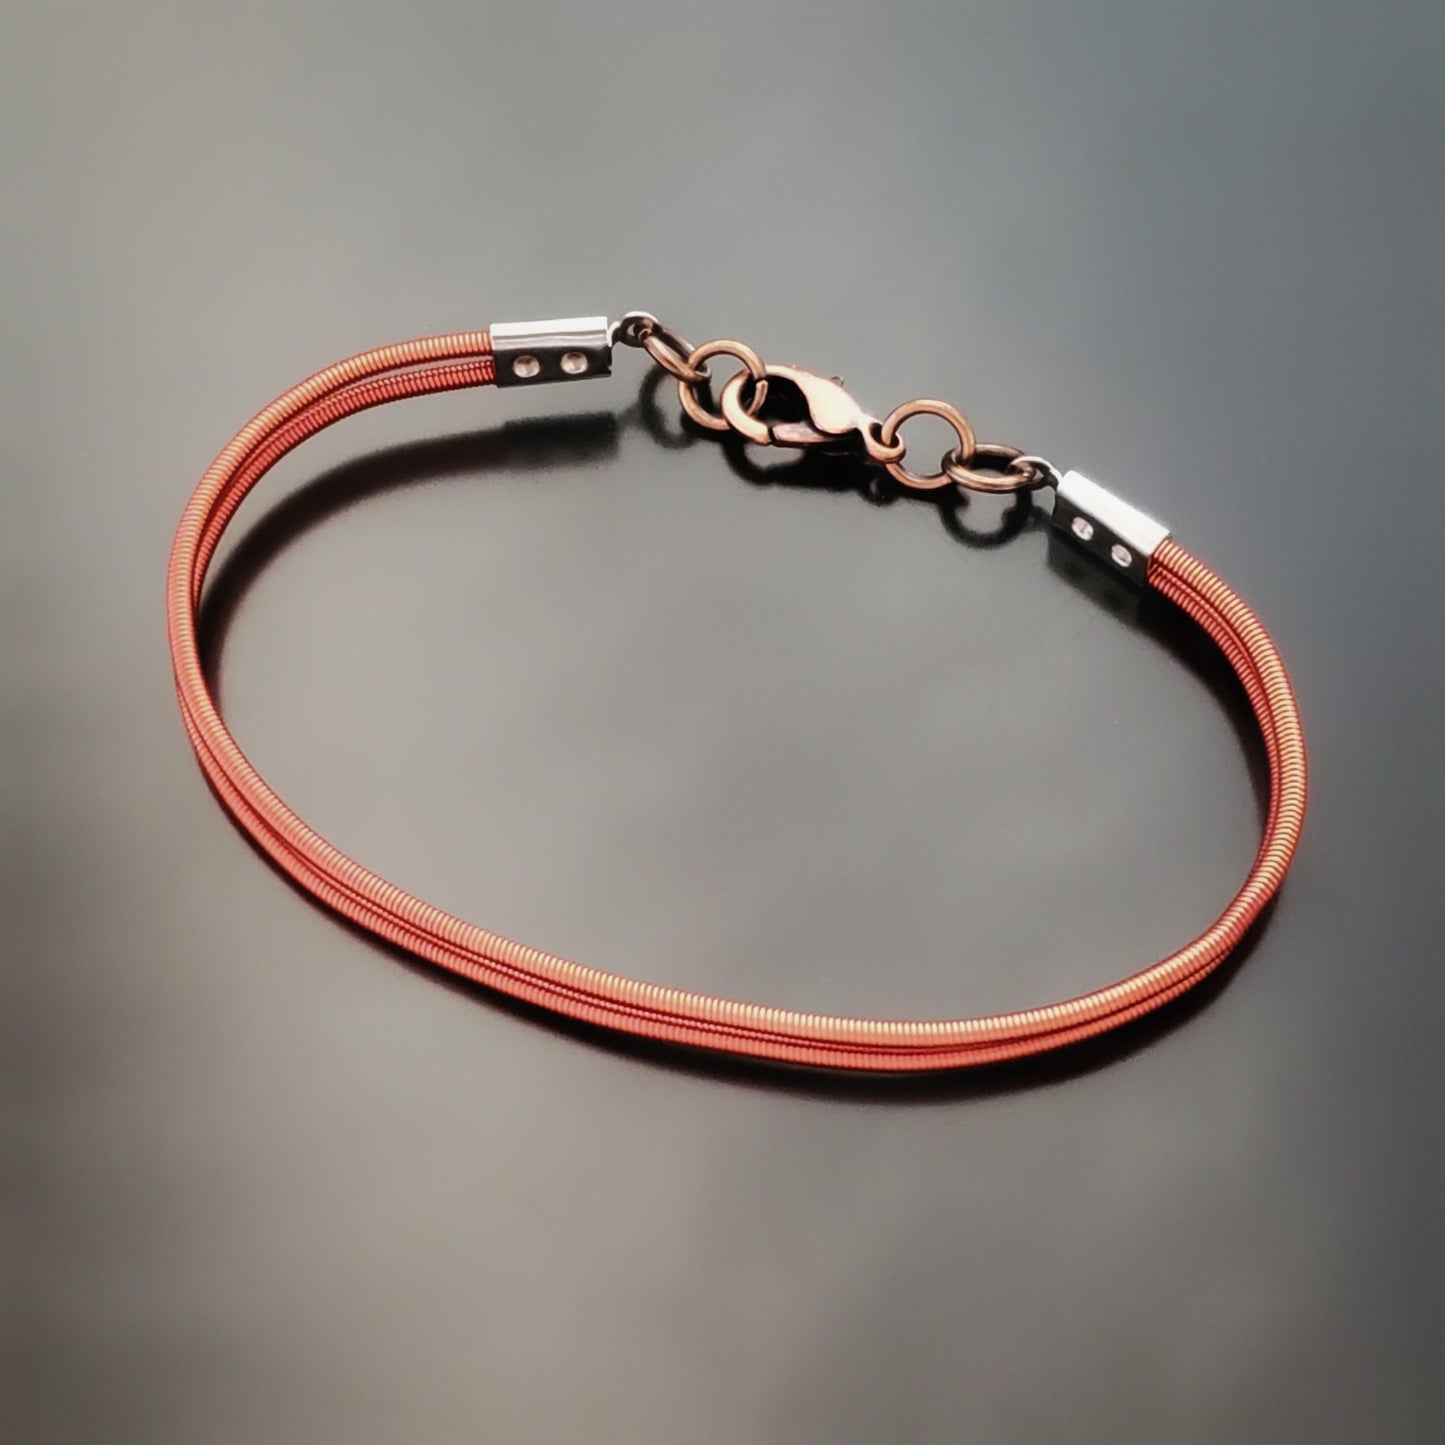 clasp style bracelet made from orange upcycled harp strings